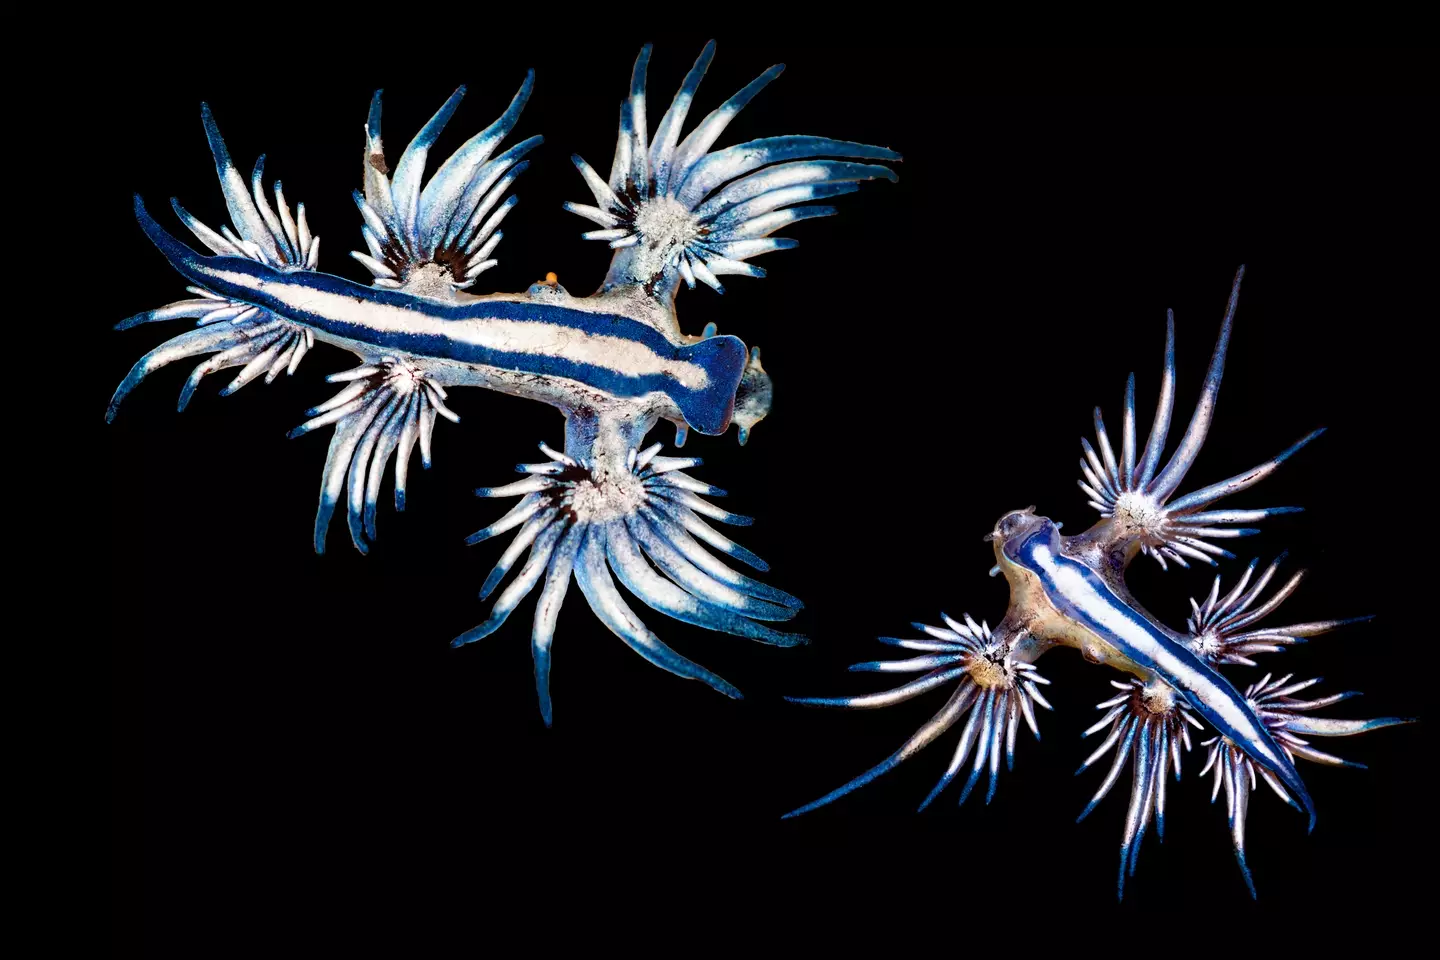 The vibrant blue glaucus atlanticus, a mollusk also known as the blue angel or blue dragon.